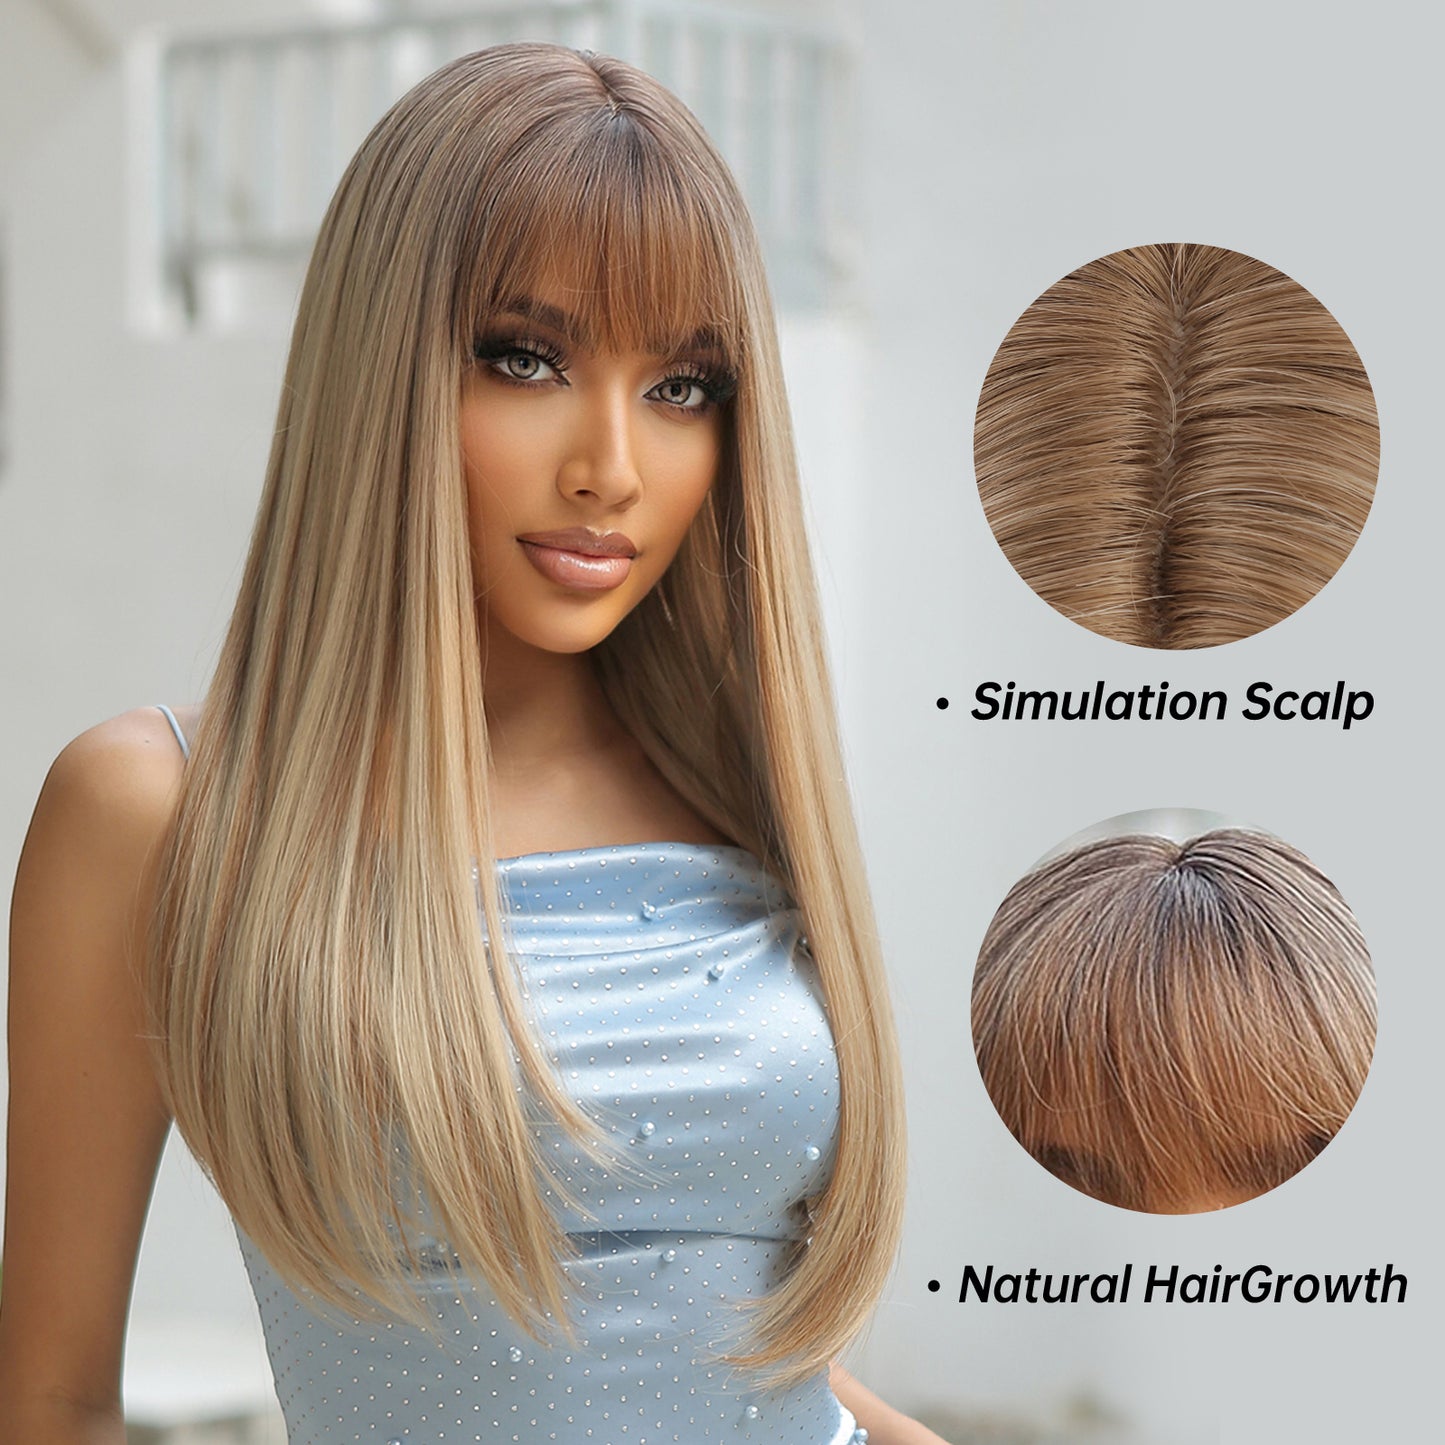 【Kinsley】Loxology | 26 Inches Long Straight Champagne Blonde Wigs Synthetic Wigs